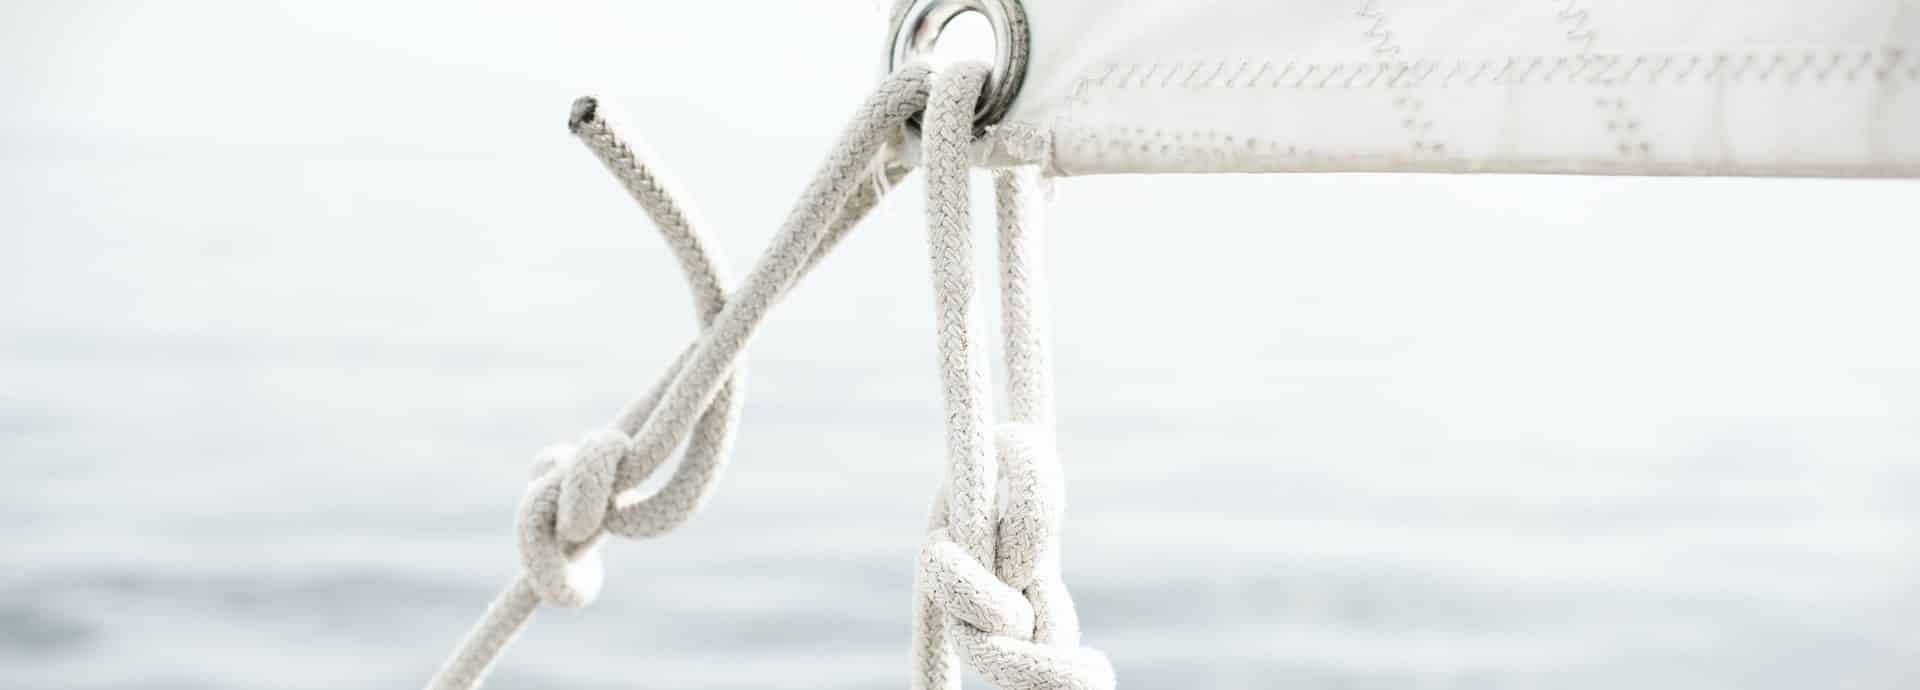 A close up image of the knotted rope tying a sail to the frame of a ship.